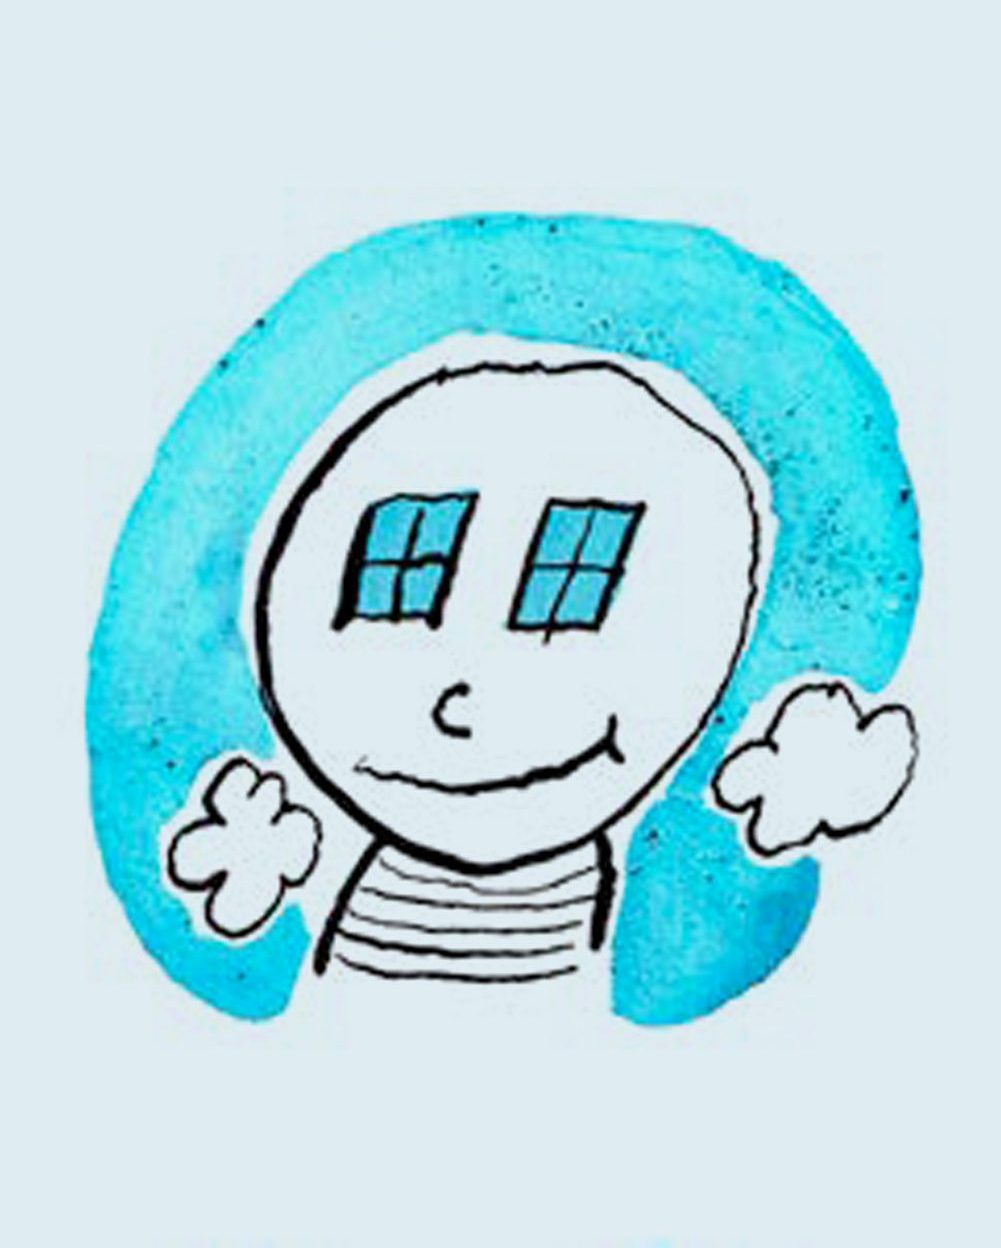 Sketch of character smiling with a blue aura around their head.